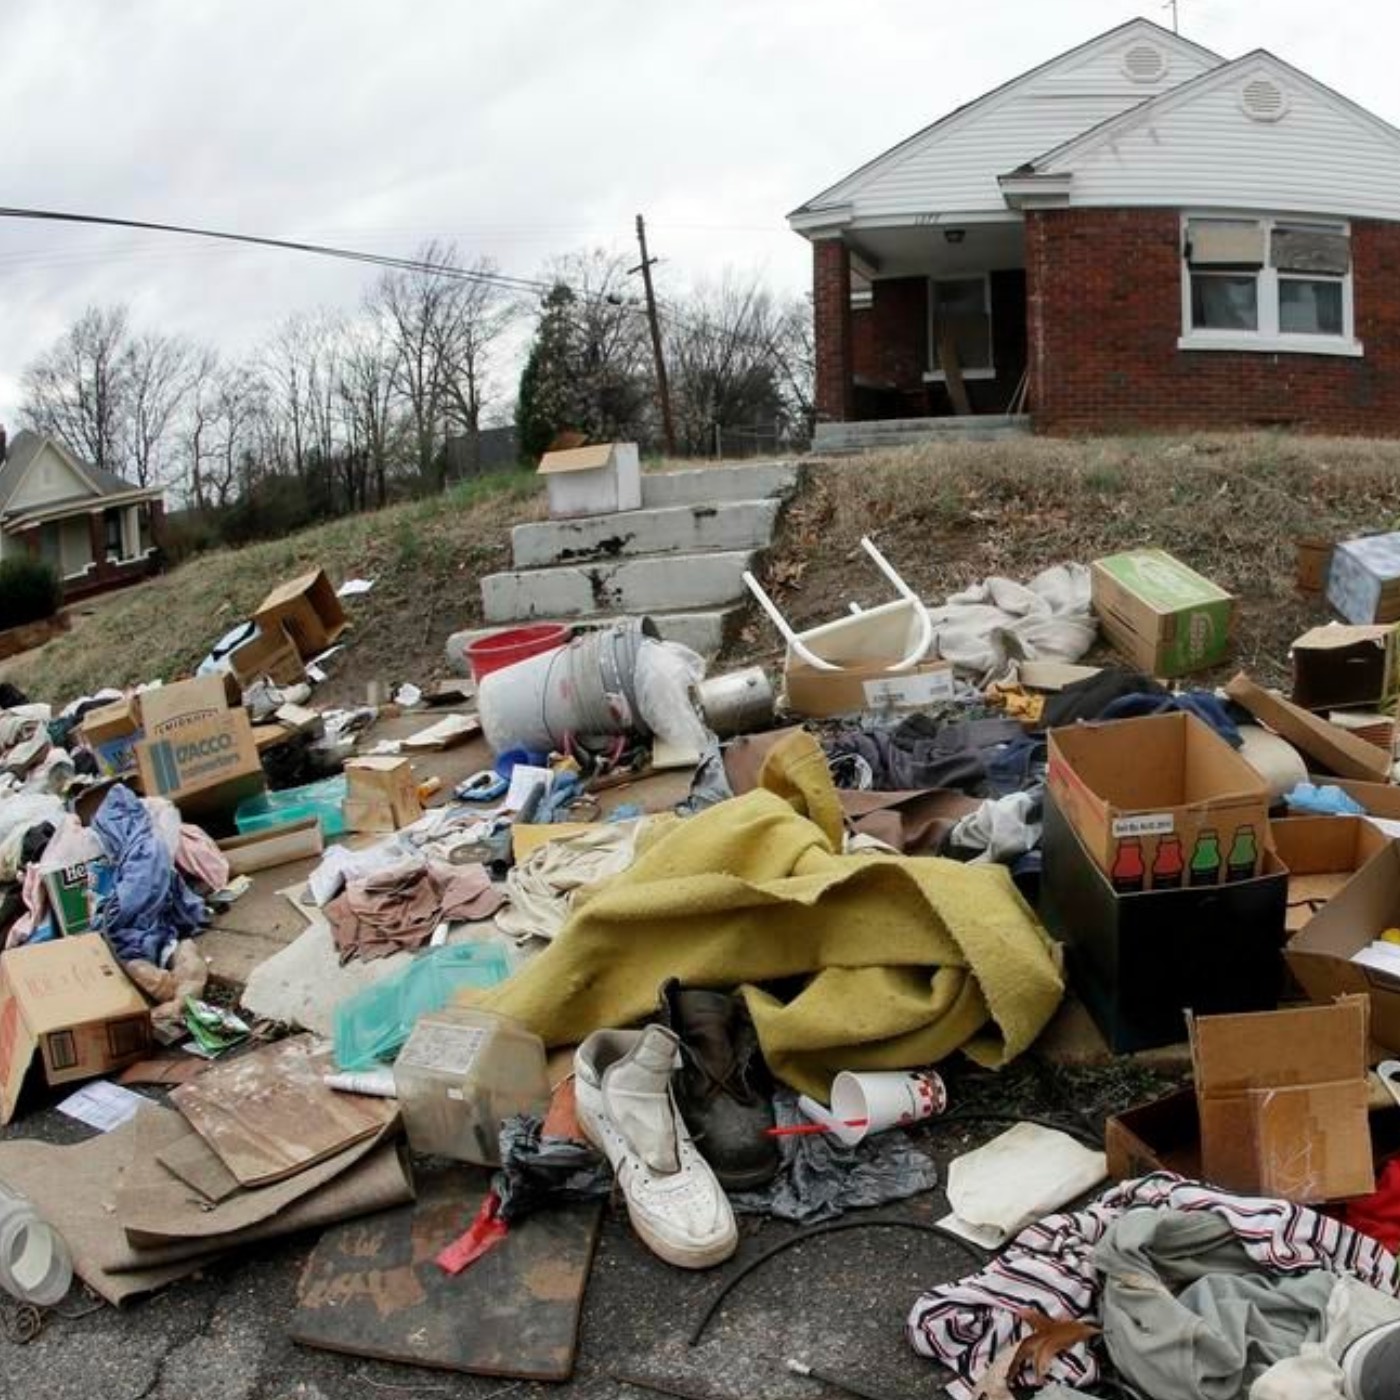 junk piled up outside house